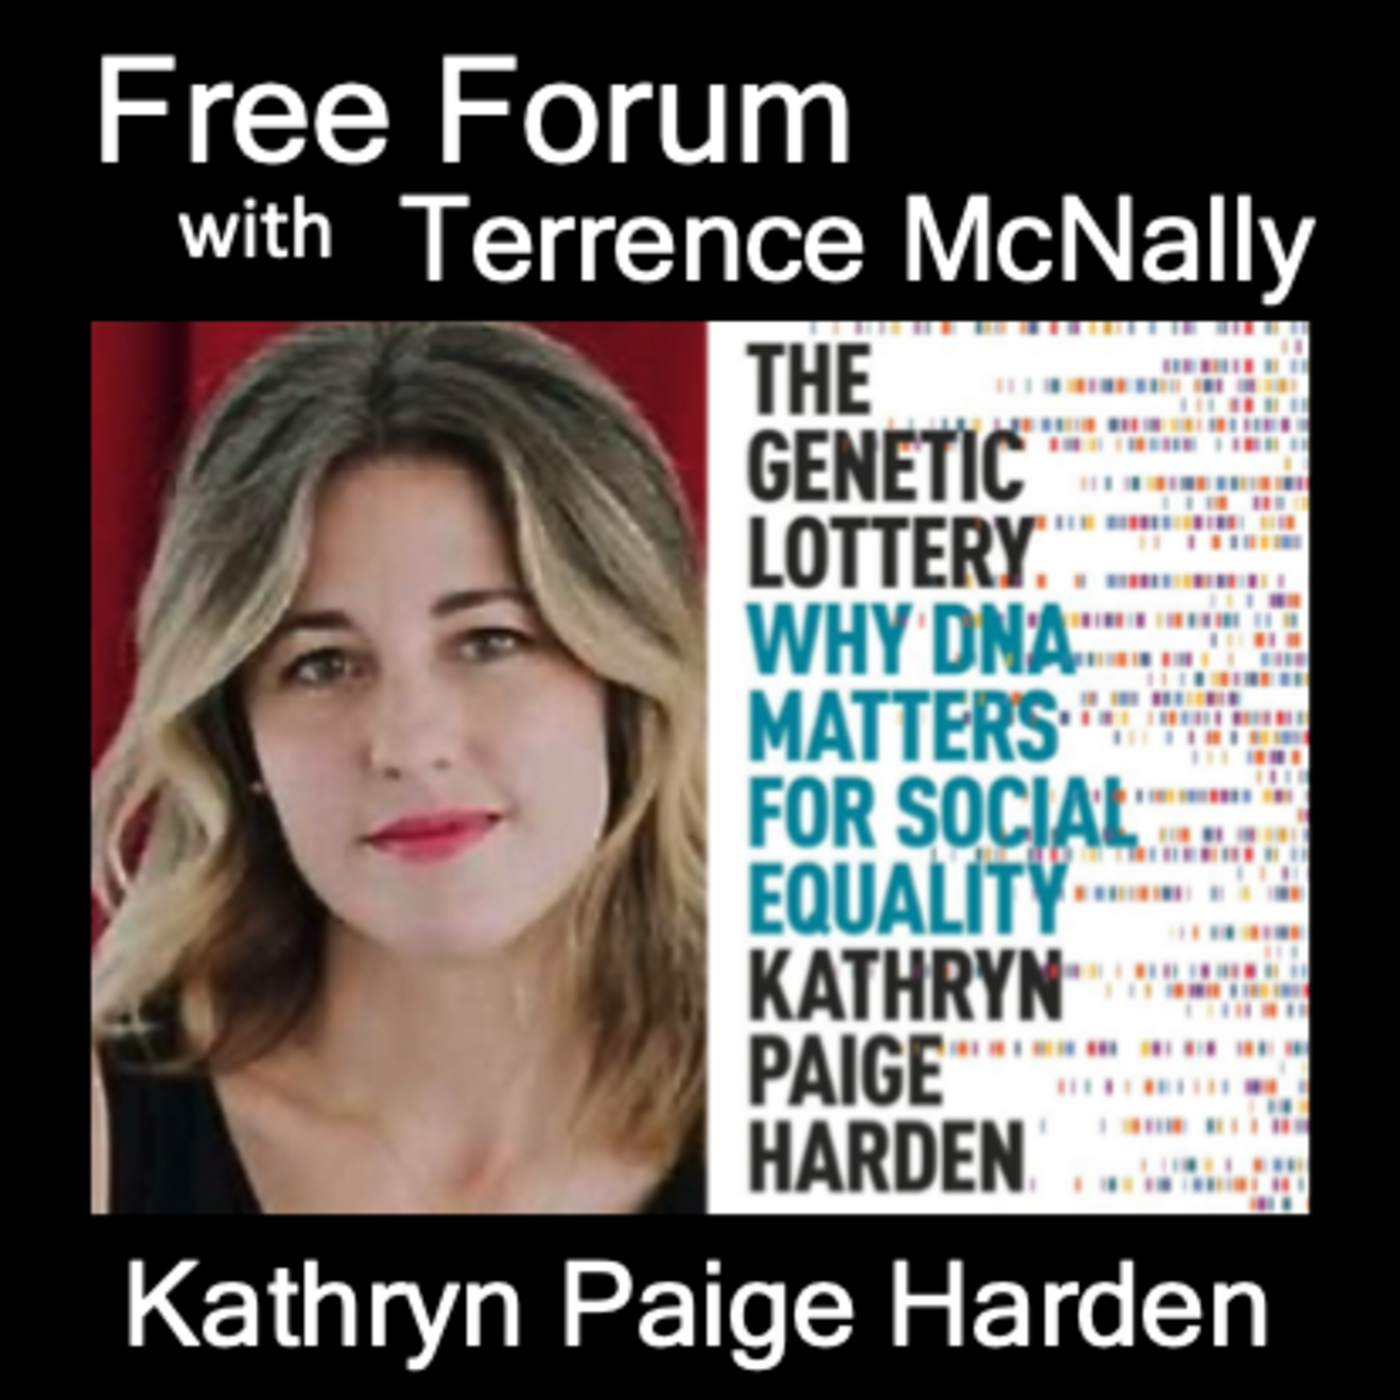 Episode 593: Podcast: KATHRYN PAIGE HARDEN, THE GENETIC LOTTERY: Why DNA Matters for Social Equality - though many want to pretend it doesn’t.